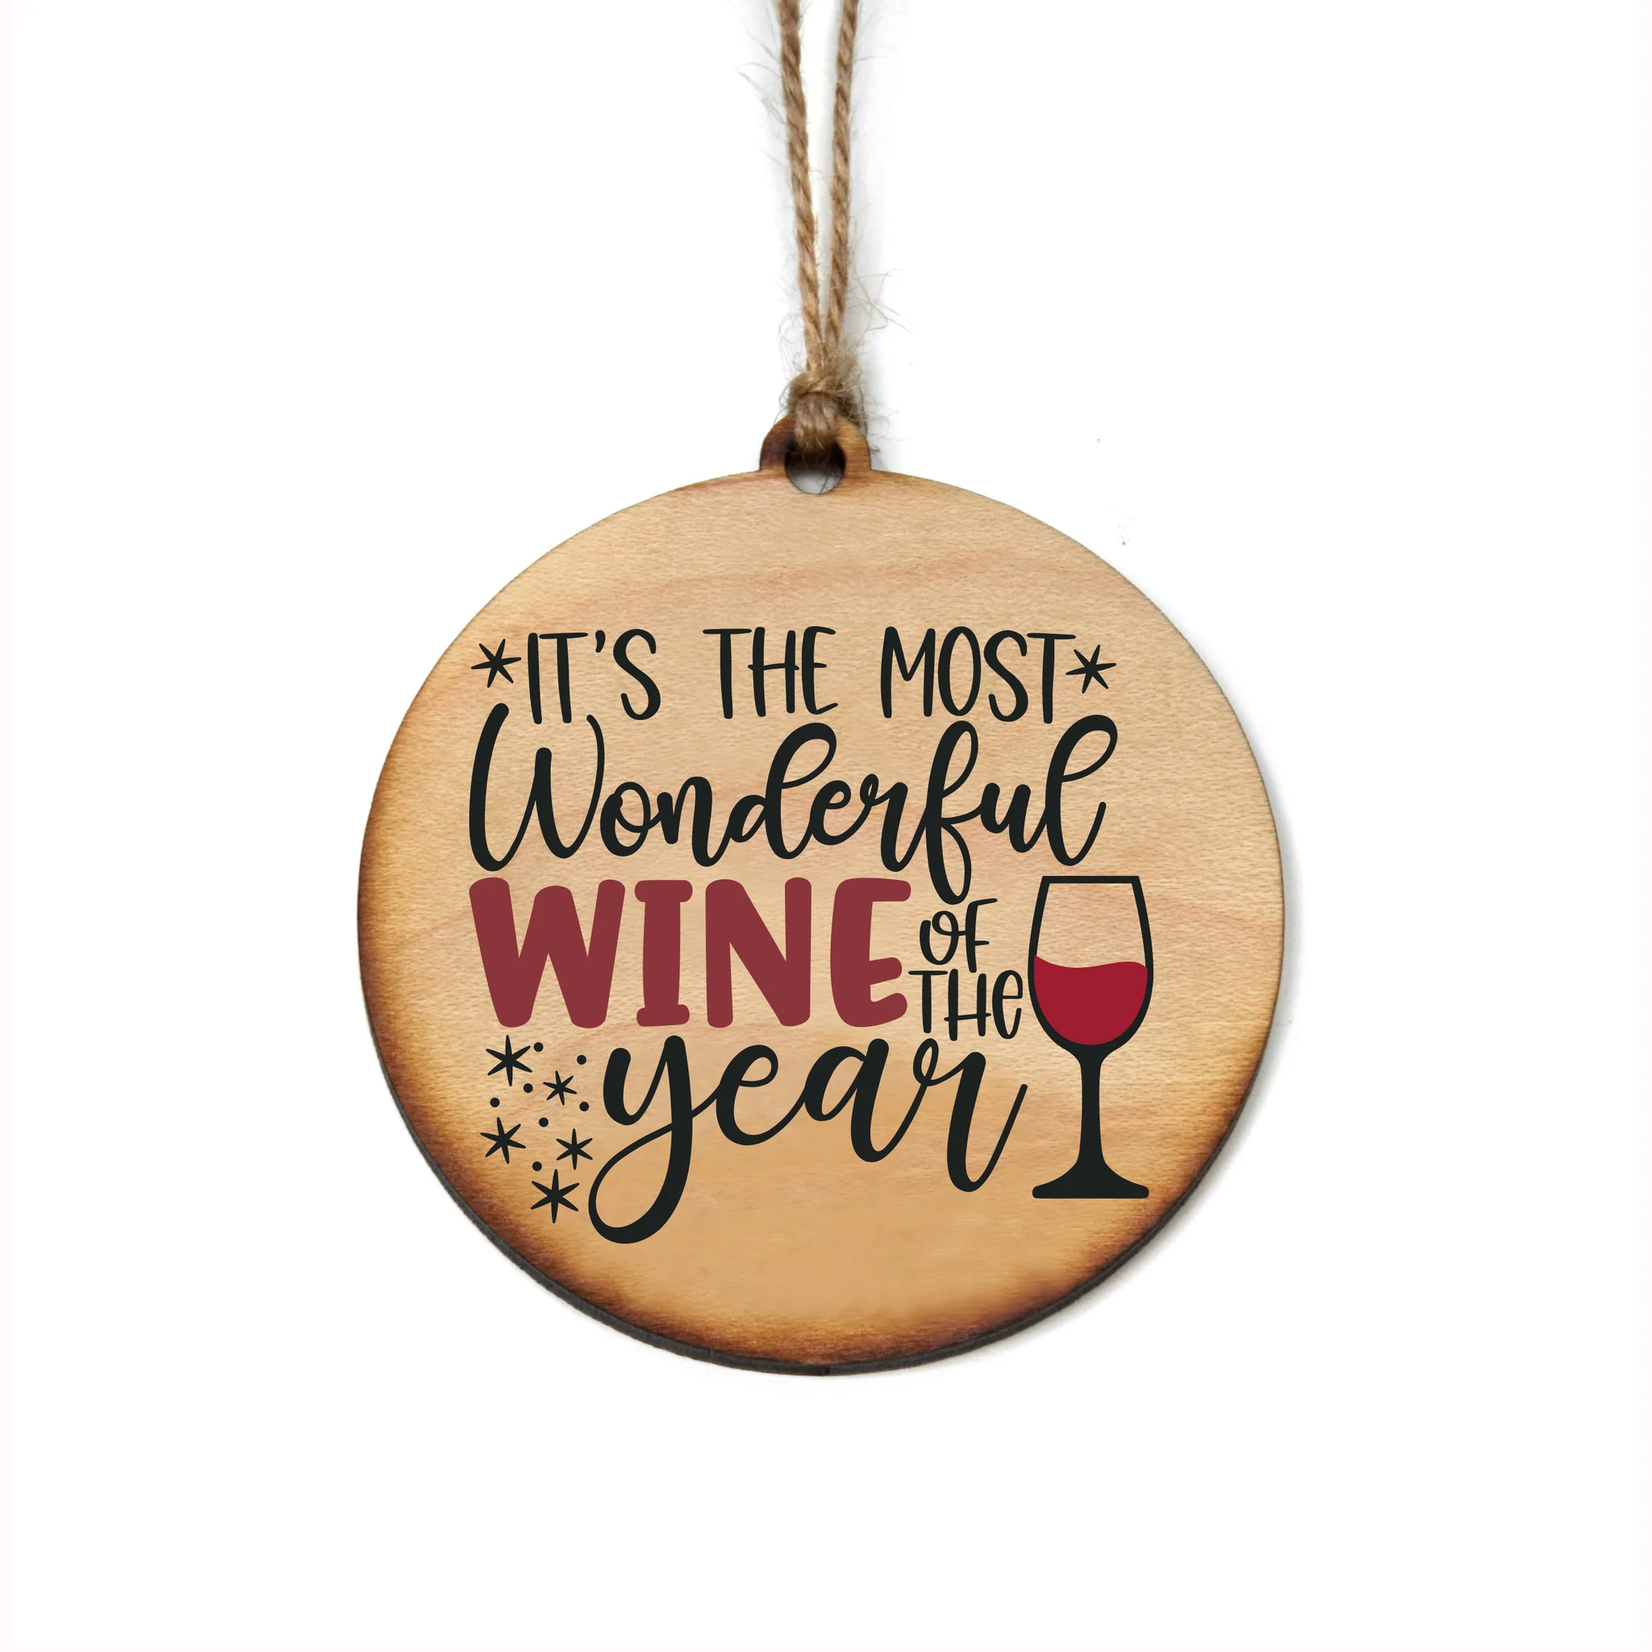 Wonderful Wine of the Year Ornament